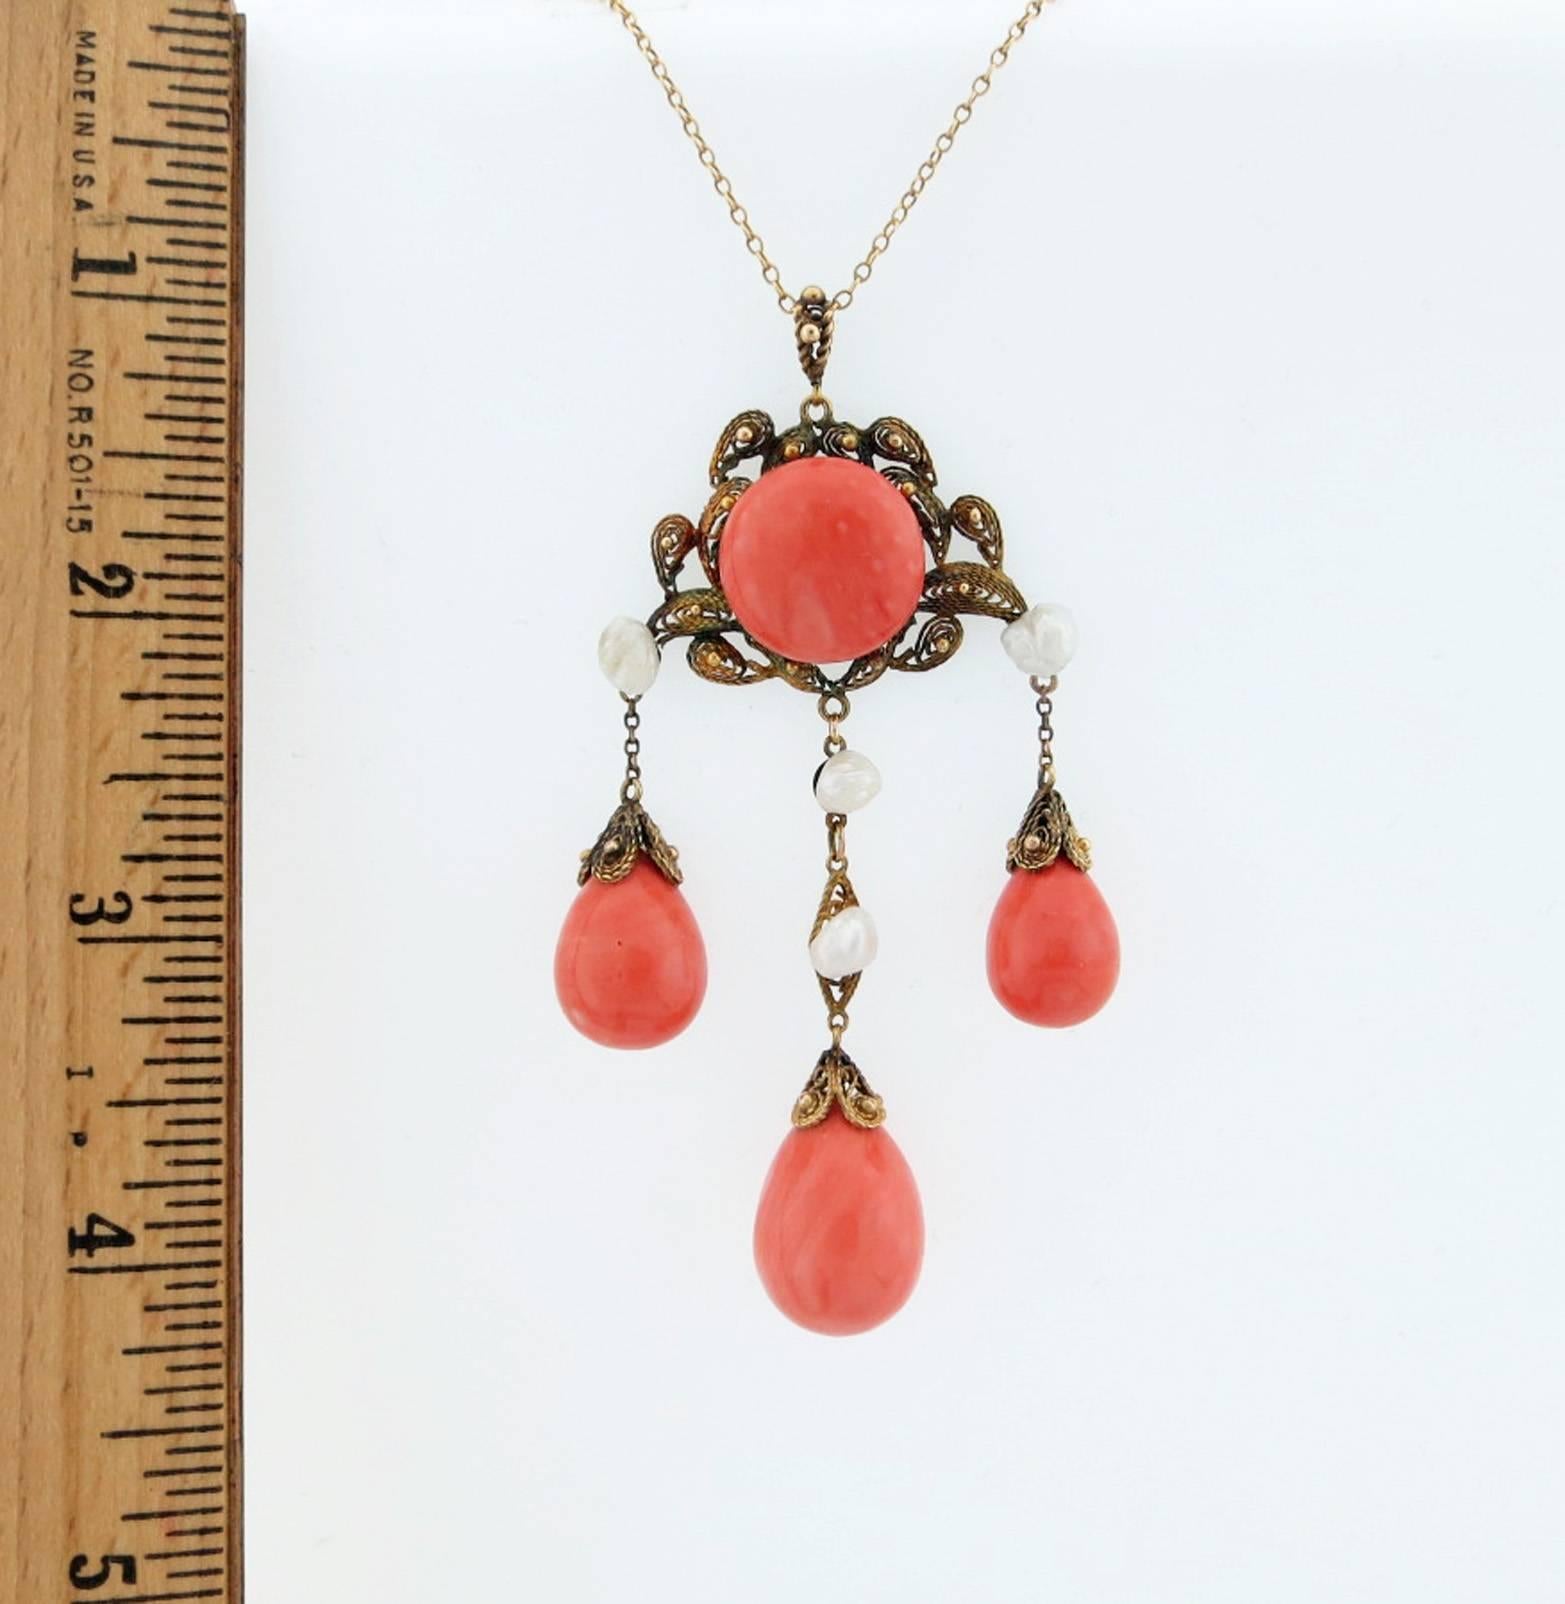 Articulated natural coral pendant with fresh water pearl accents in 14kt. yellow gold granulated wire work mount. The chain is 18 inches in length with a  3 1/2 inch pendant that is set with a coral button center measuring approx 16.8mm. the center